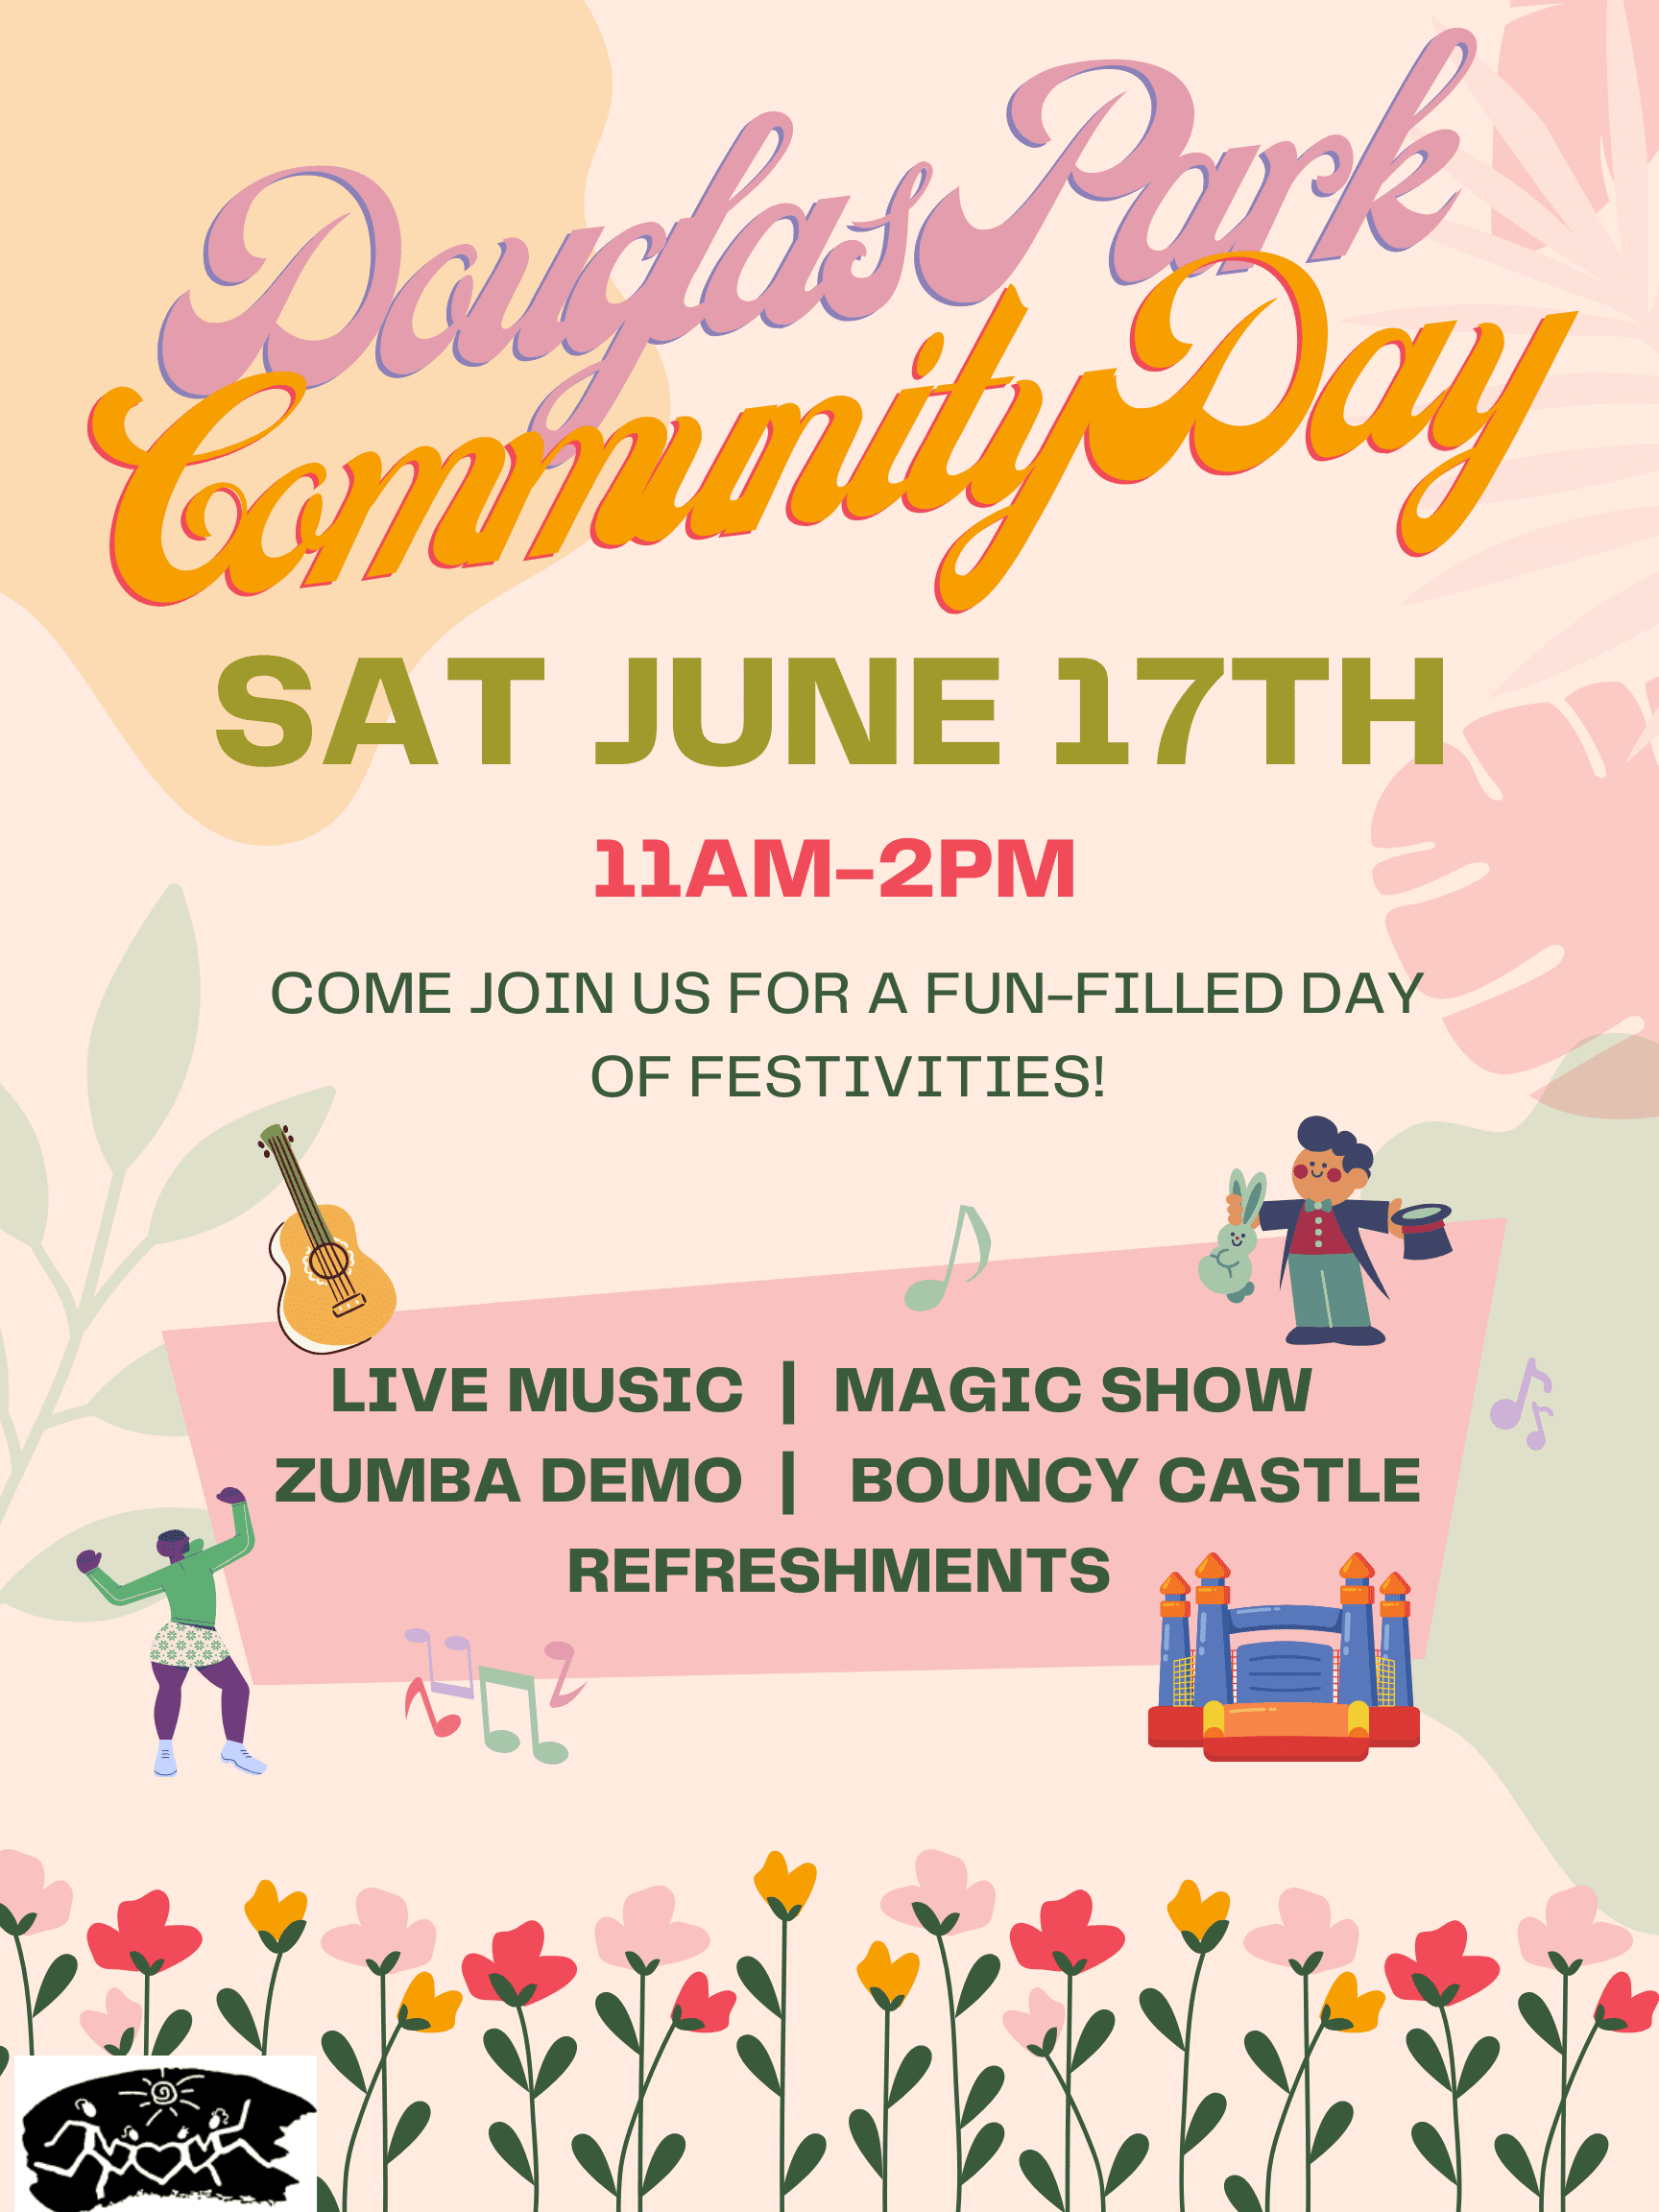 Douglas Park Community Day Saturday June 17, 11-2pm come join us for a fun-filled day of festivities 